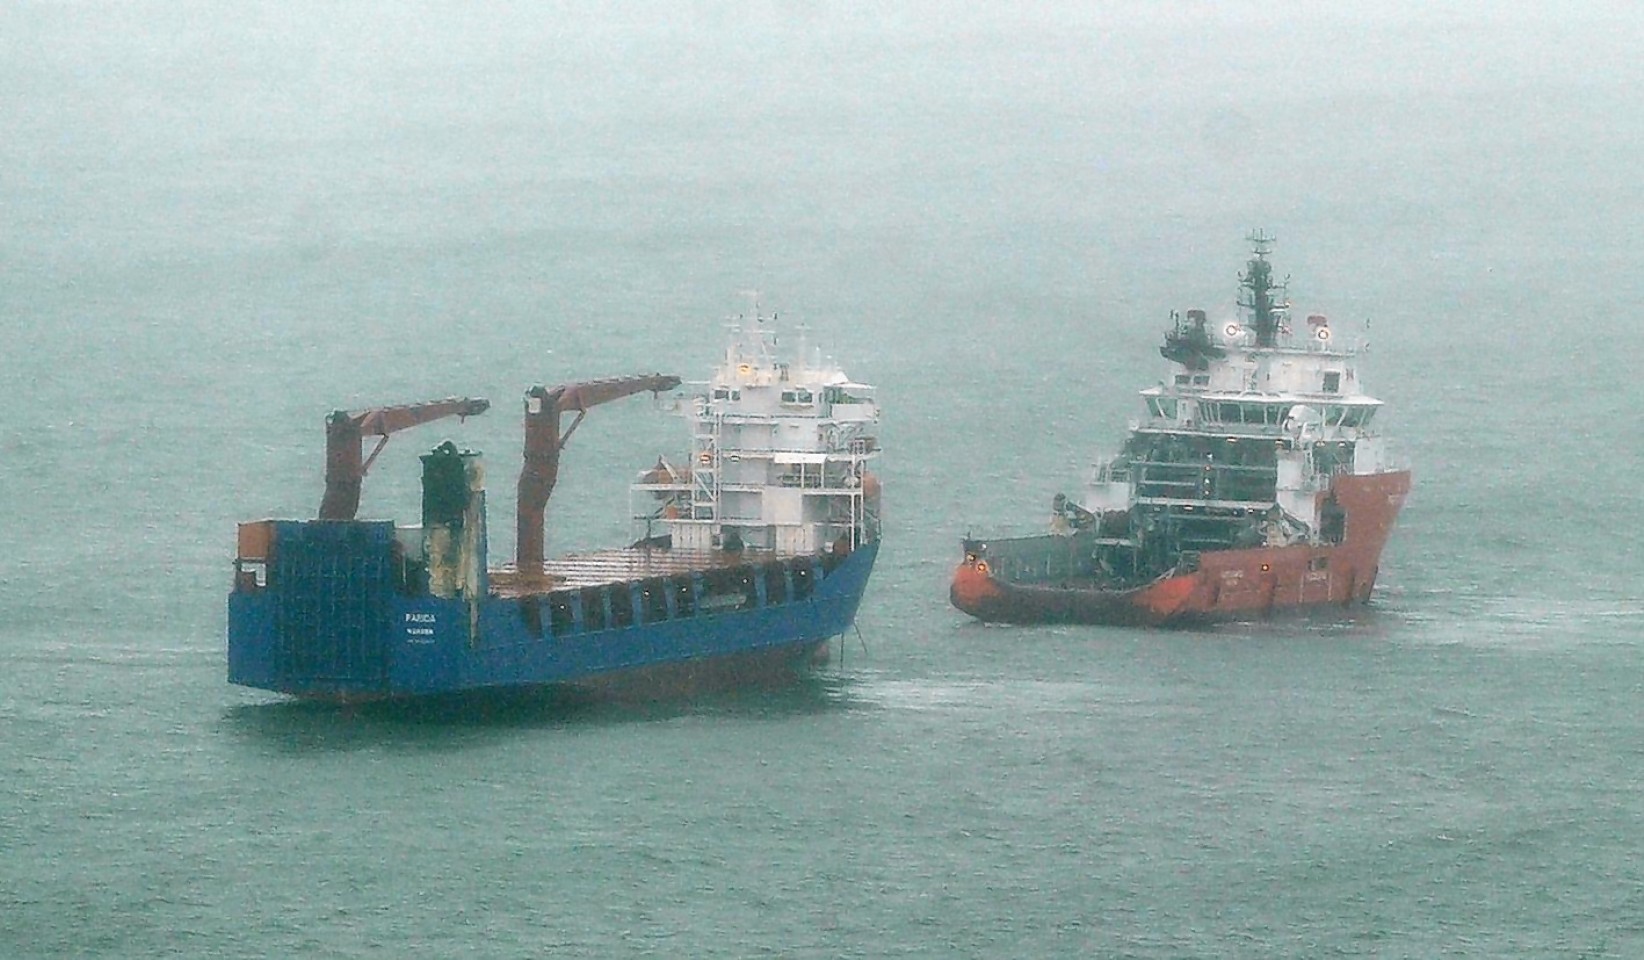 The Parida being towed to safety